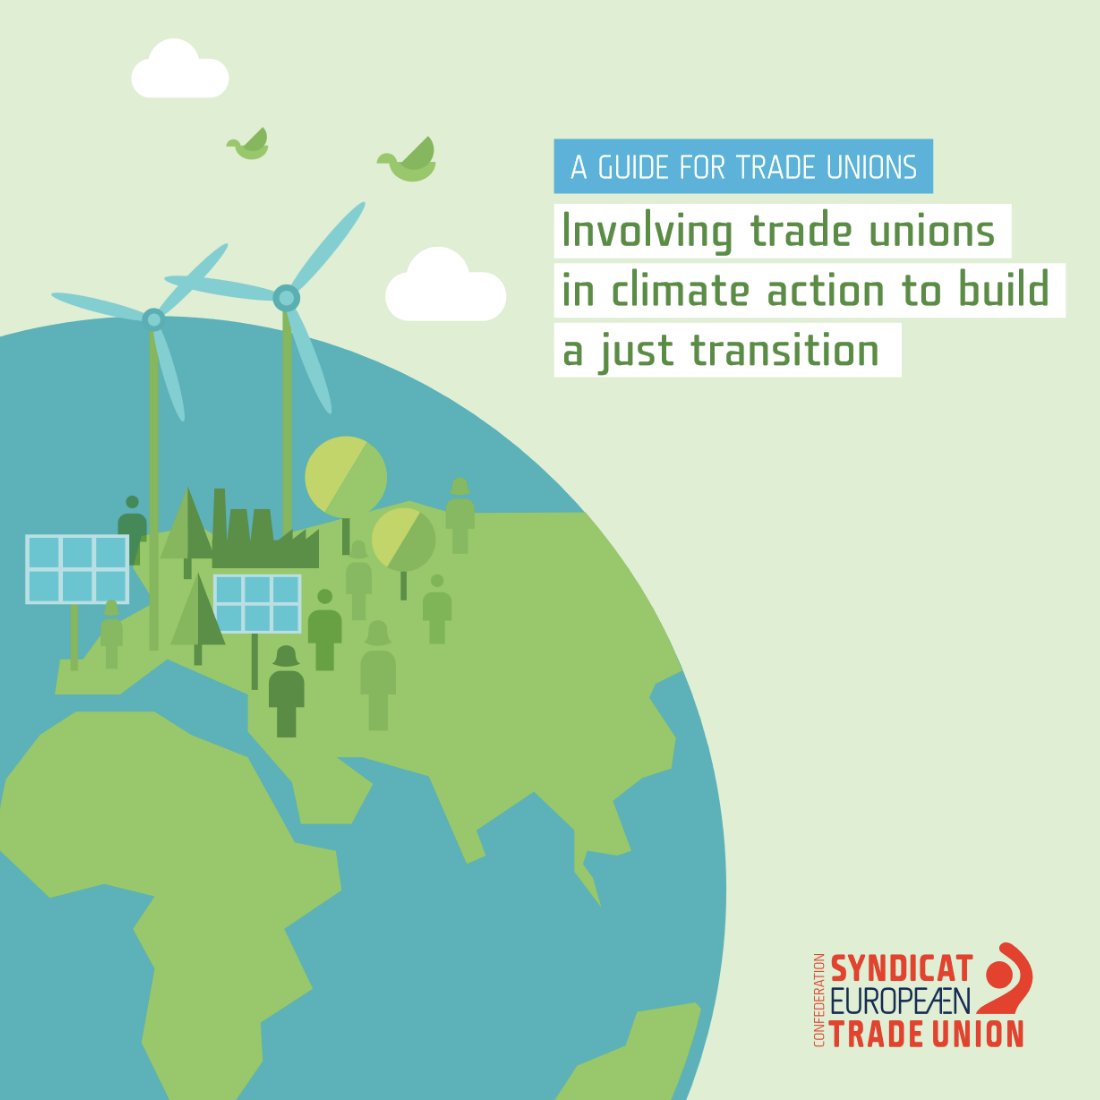 Involving trade unions in climate action to build a just transition